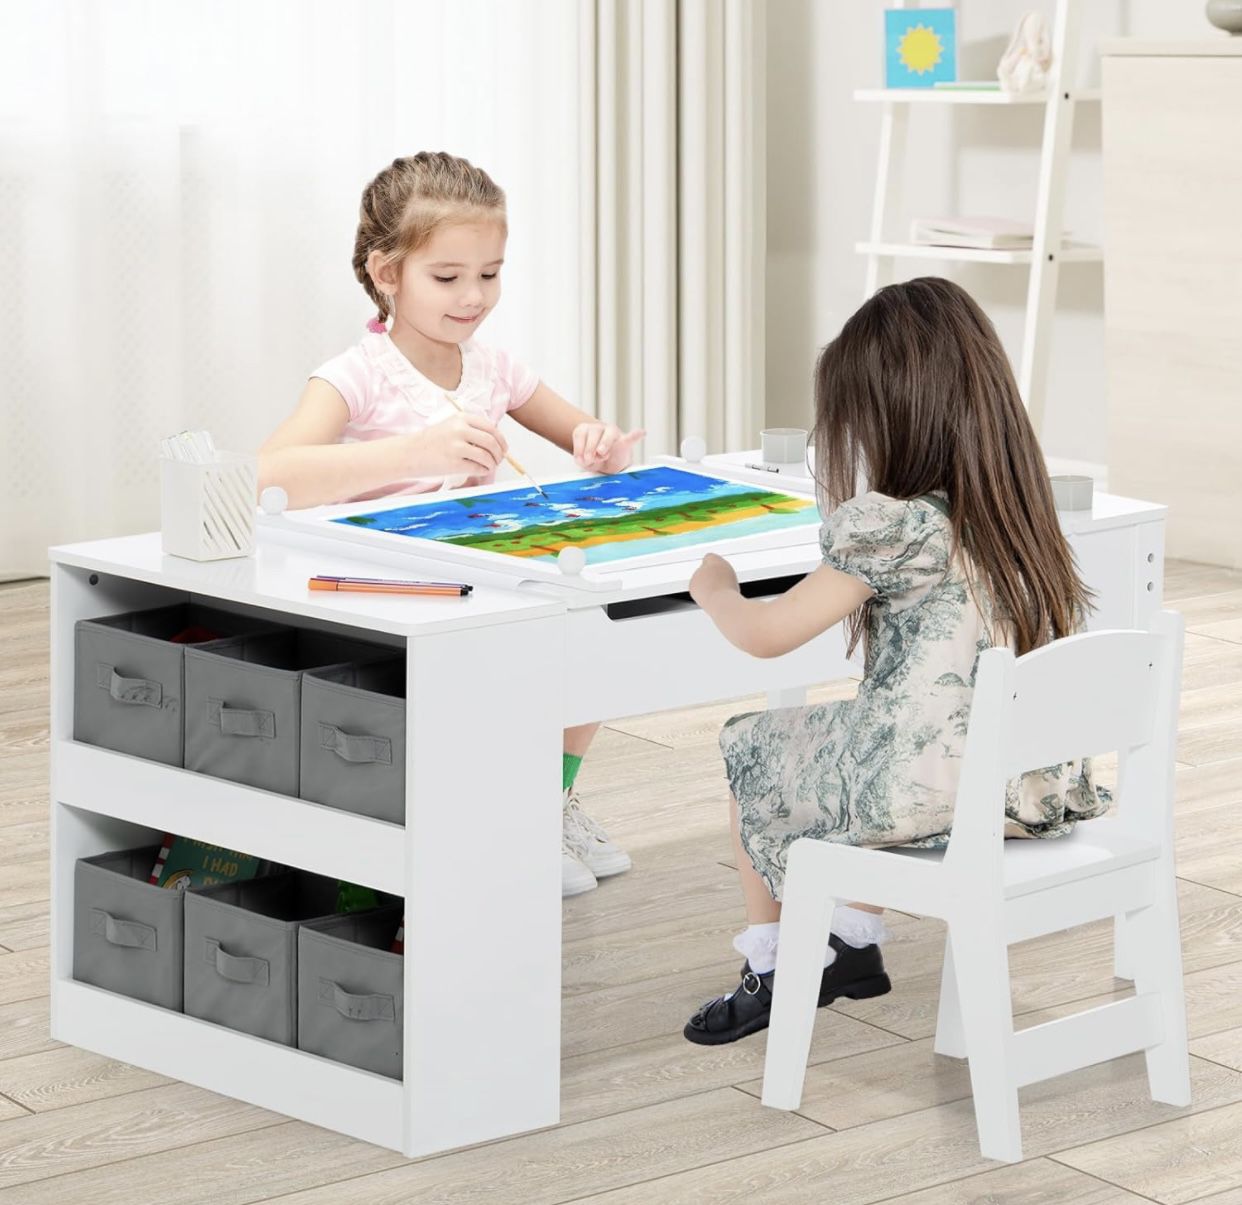 2 in 1 Kids Art Table and Chair Set, Toddler Craft Play Wood Activity Desk